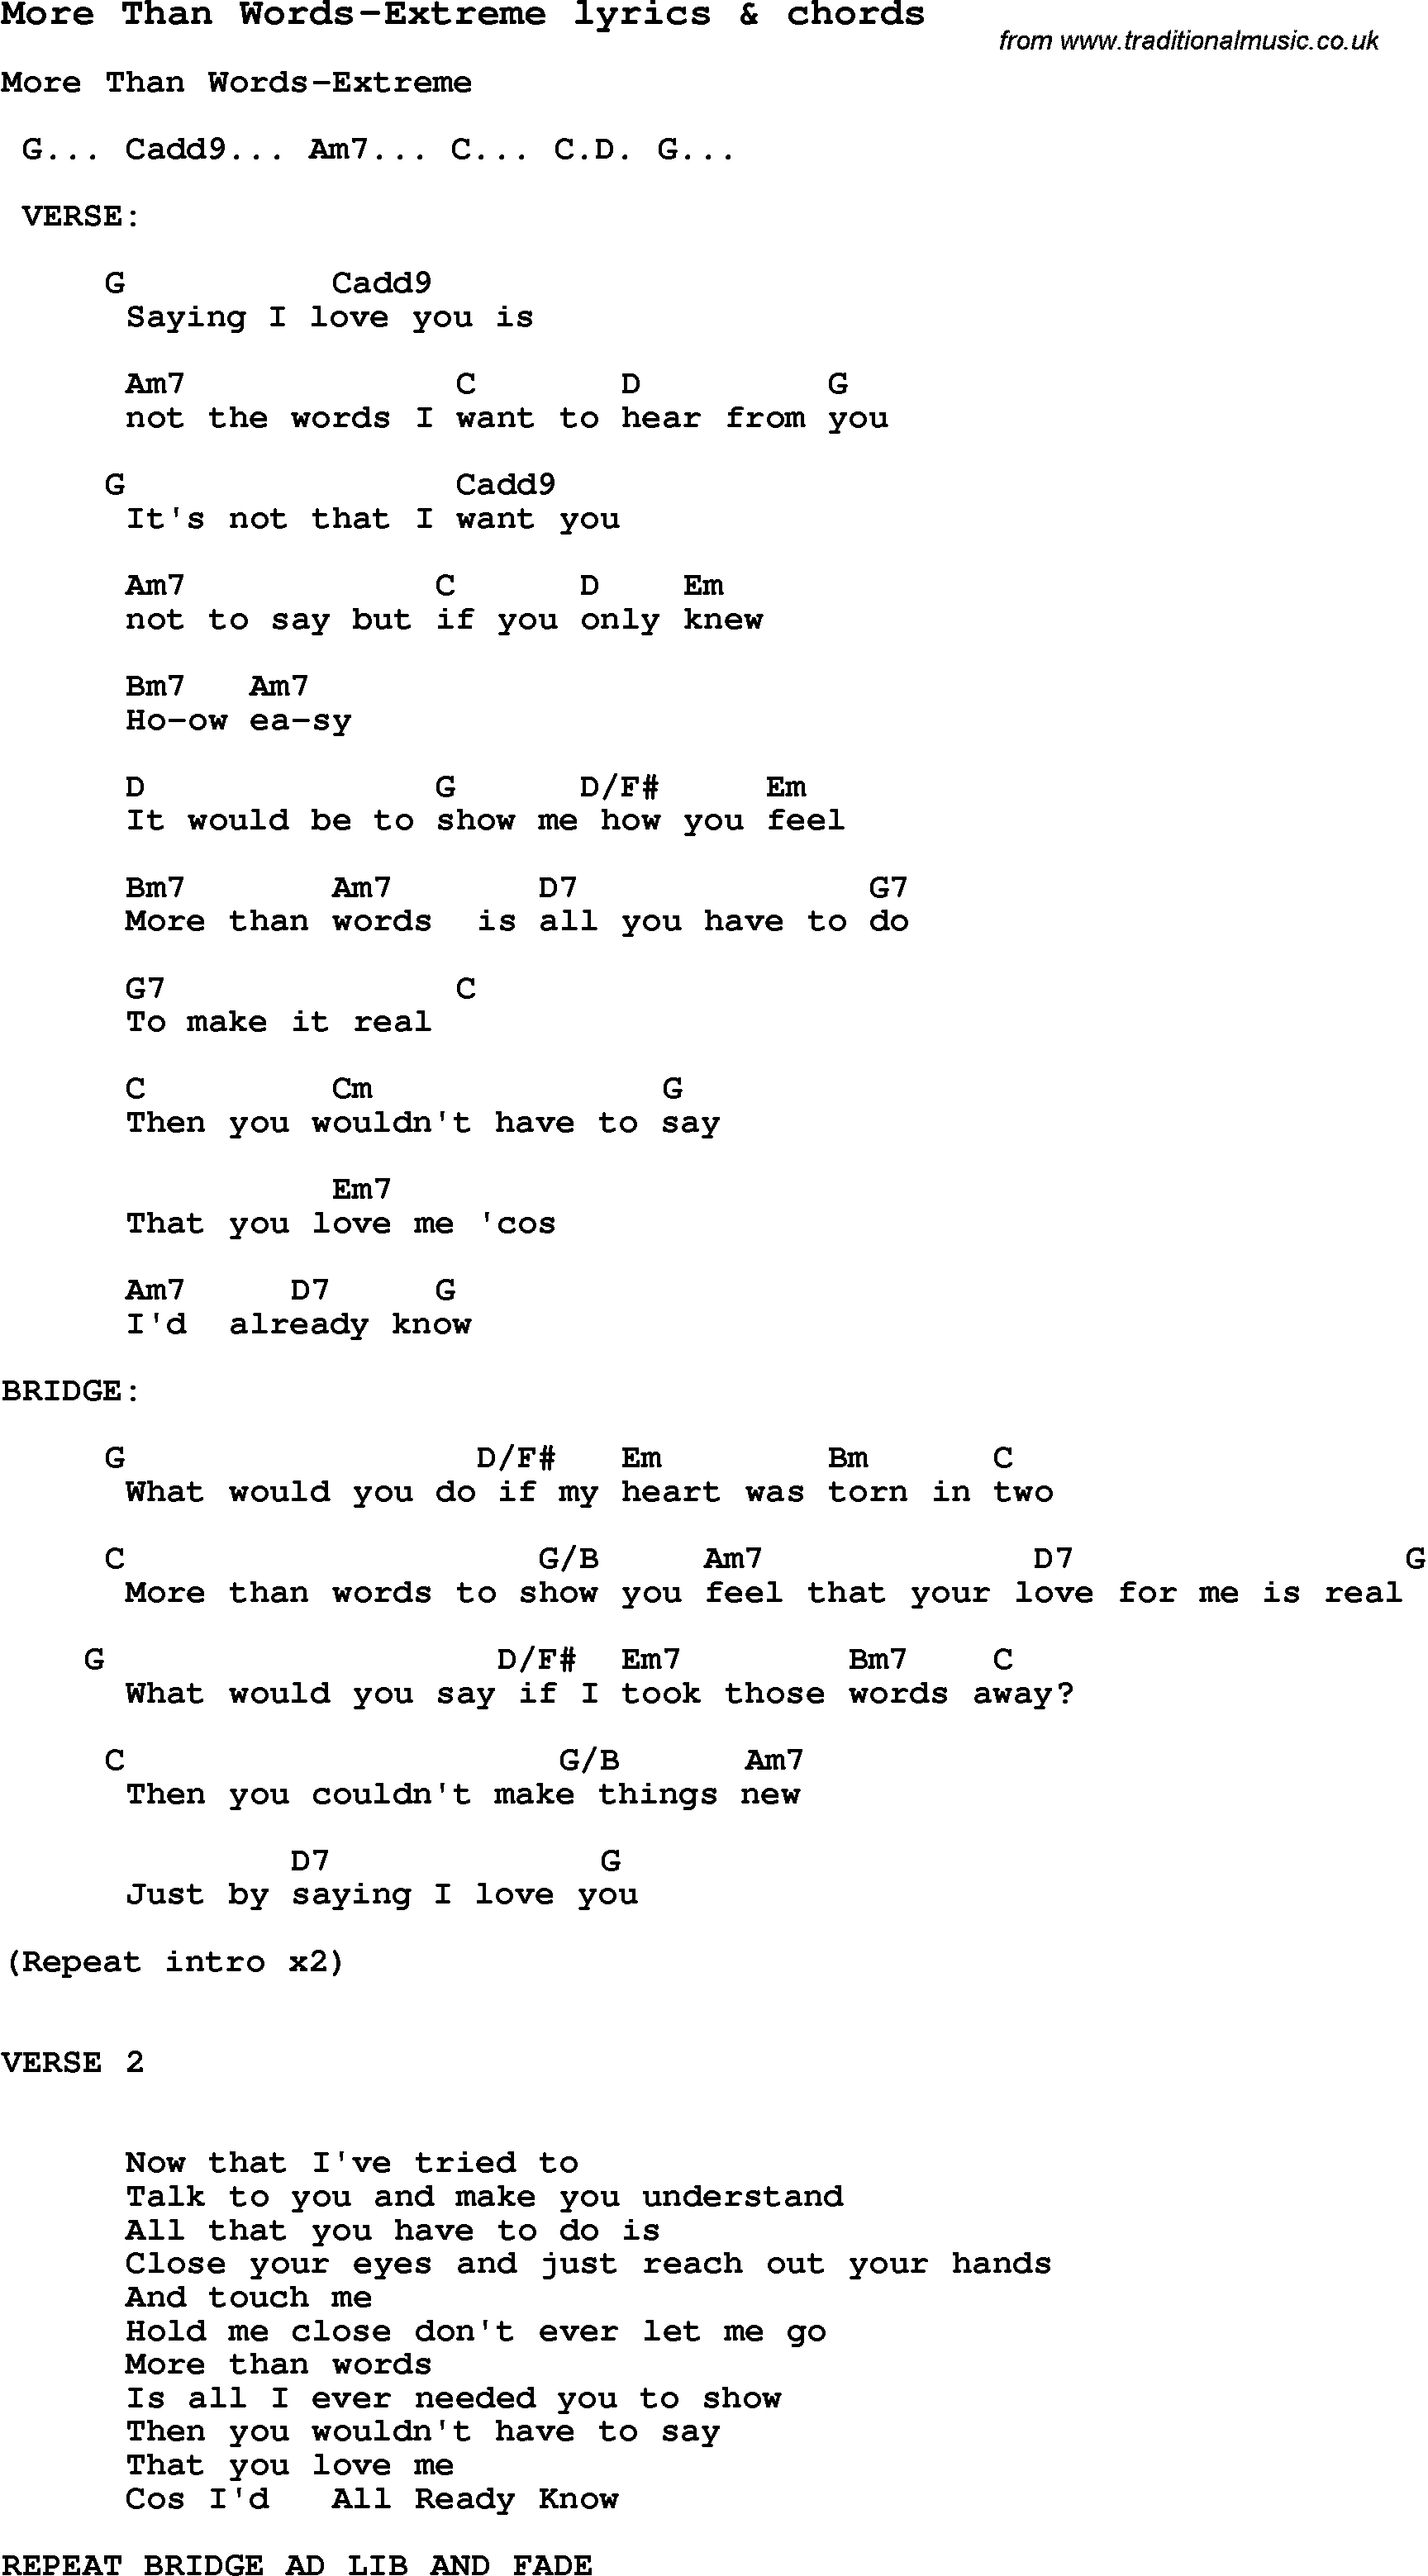 Love Song Lyrics for: More Than Words-Extreme with chords for Ukulele, Guitar Banjo etc.